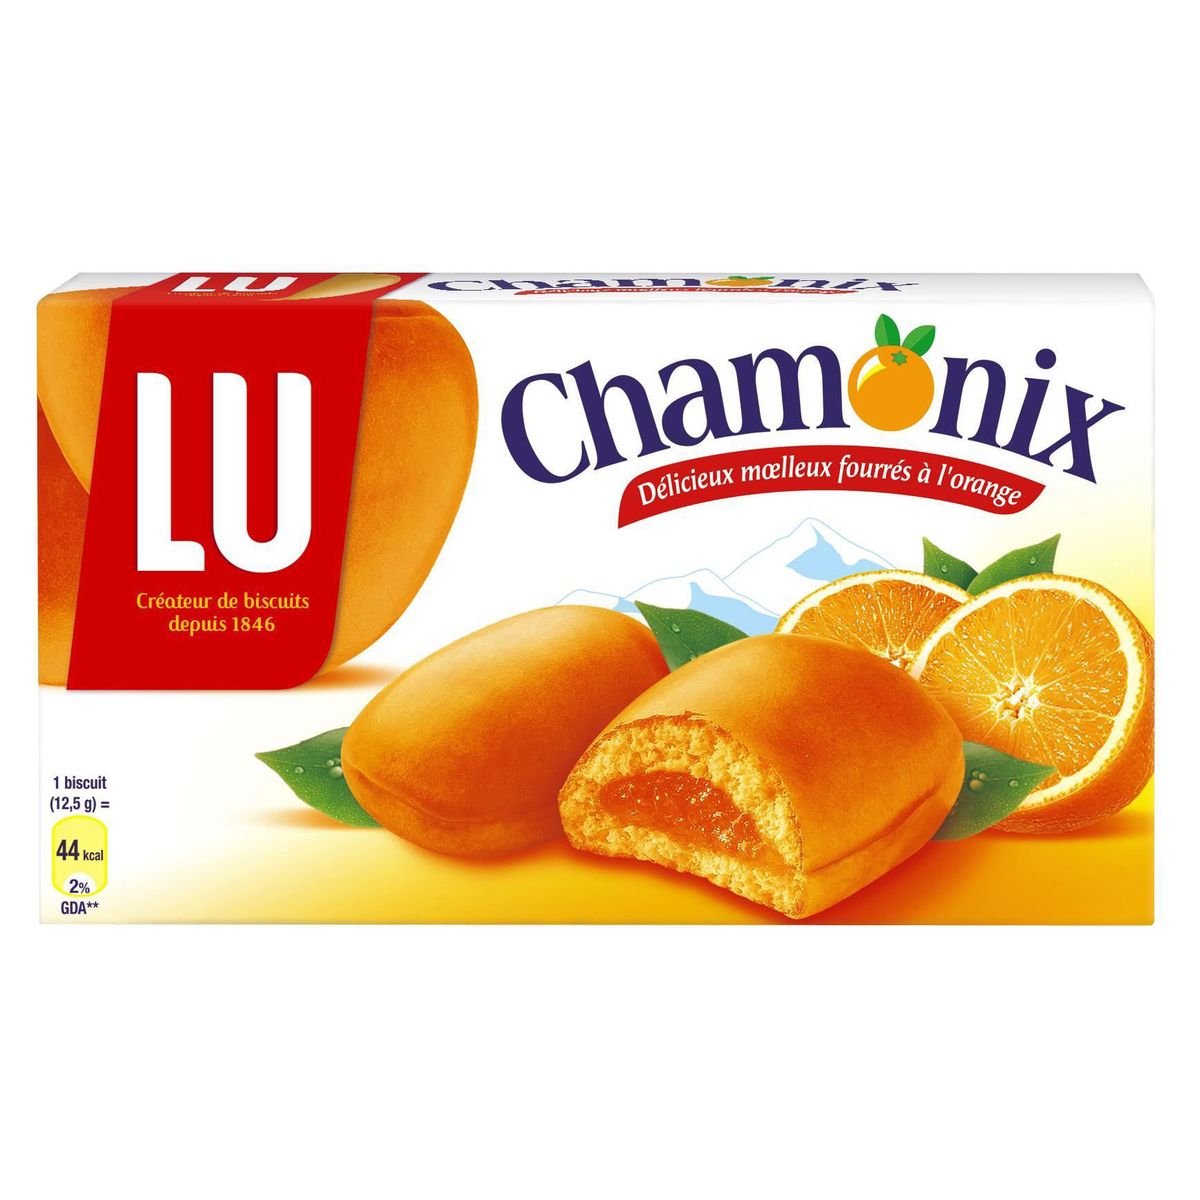 Chamonix Orange Filled Biscuits Buy Online My French Grocery